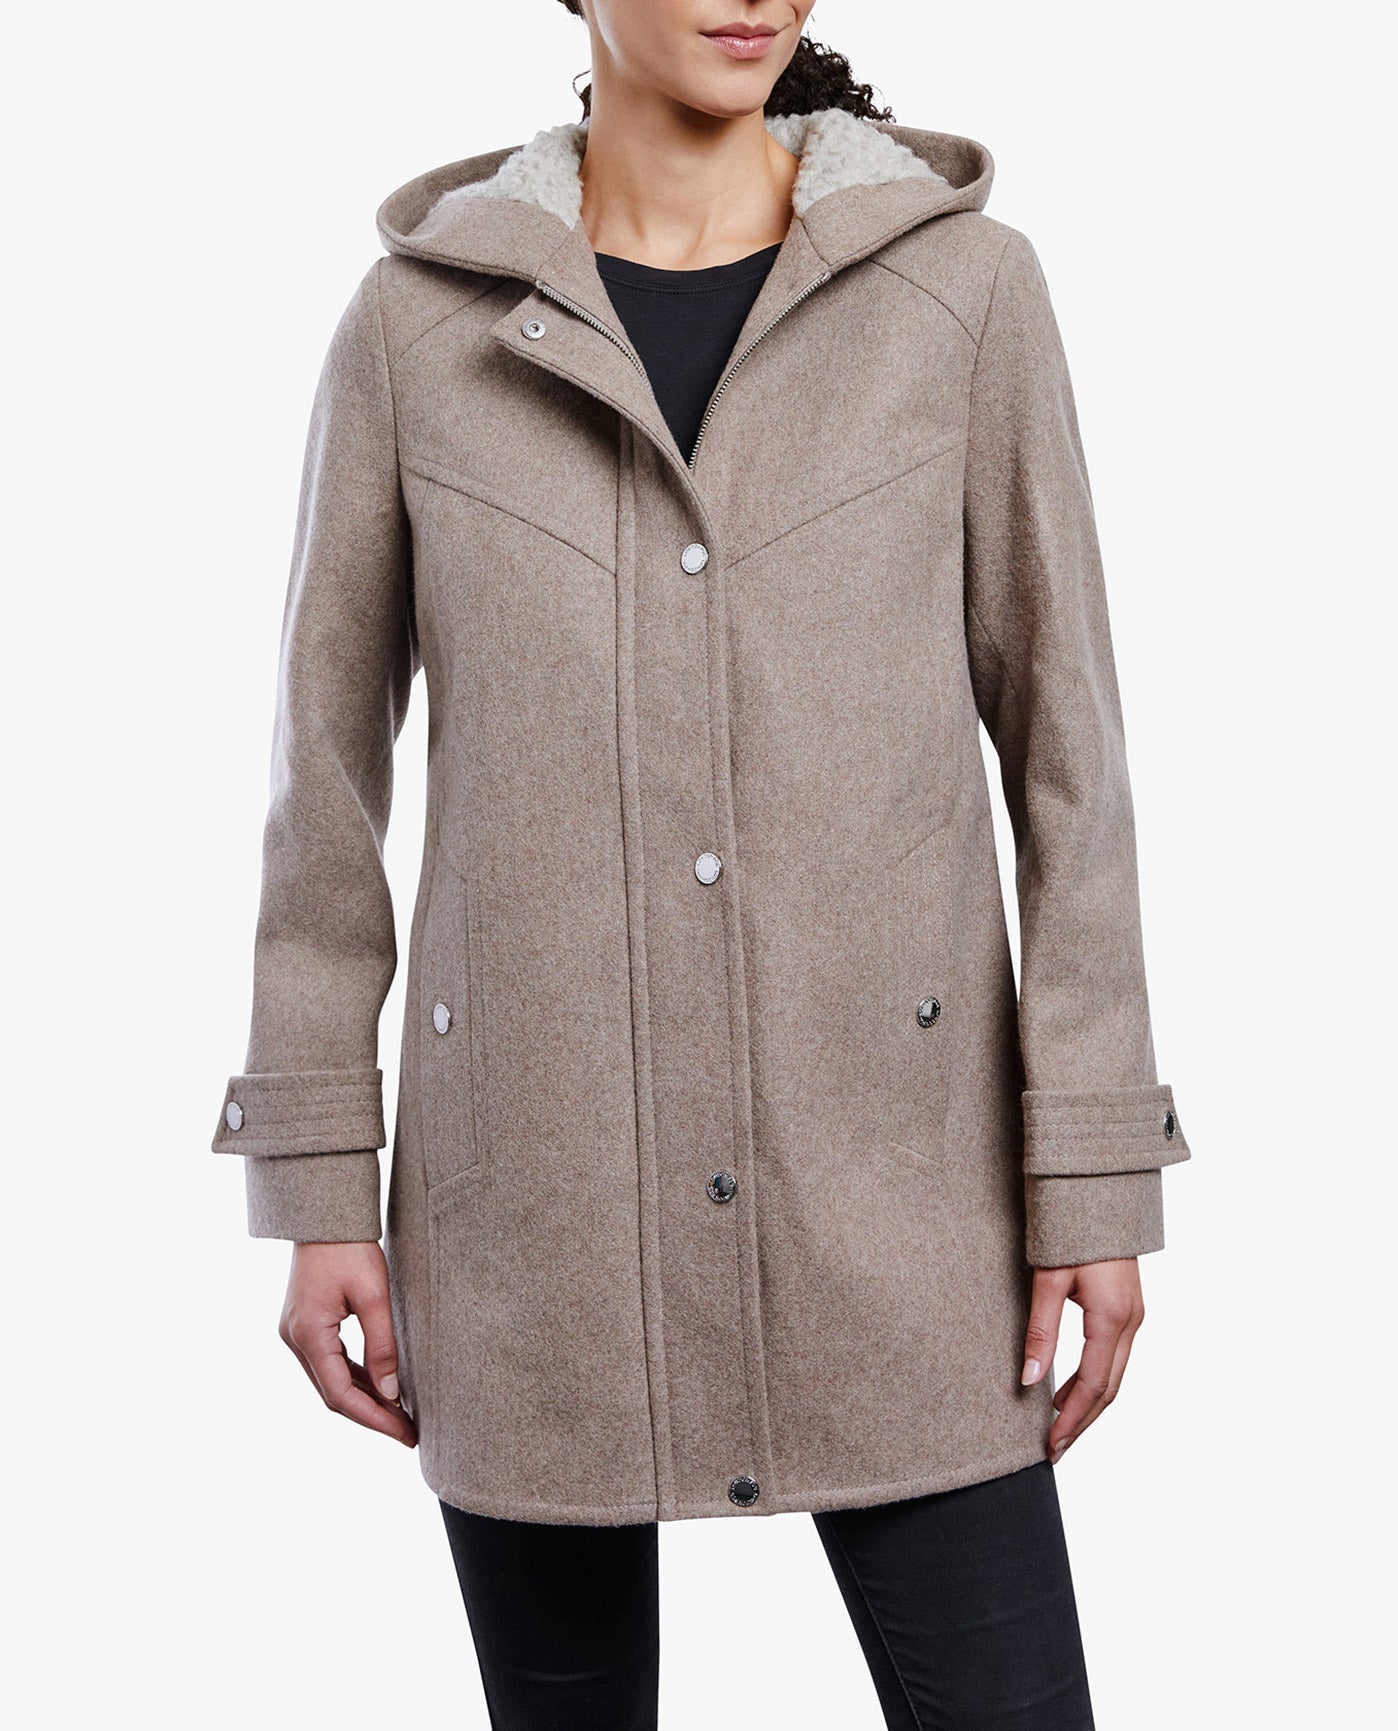 Front View Of ZIP-FRONT SHERPA LINED HOOD 31 INCH WOOL JACKET | TAUPE HEATHER